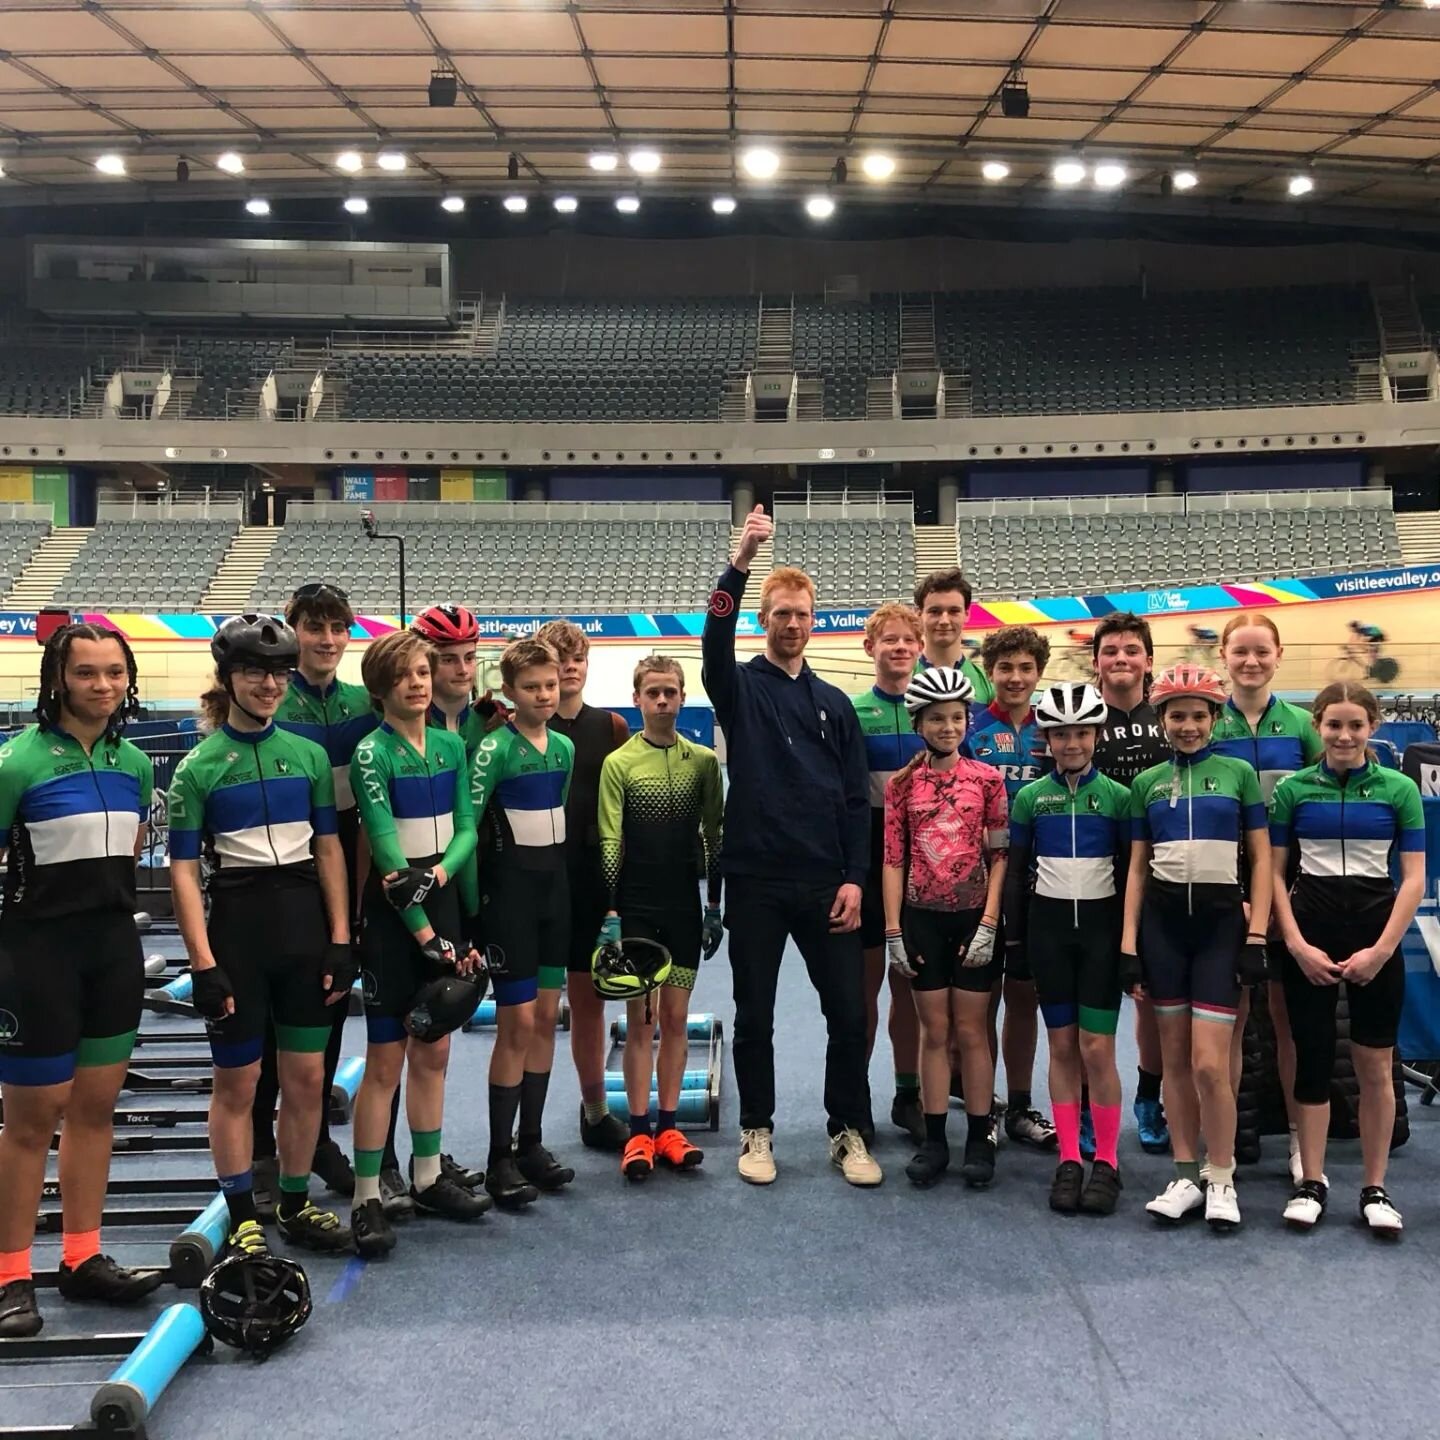 When @ed.clancy appears at a track session, a group photo is a must!! Thanks for being awesome Ed 🎉